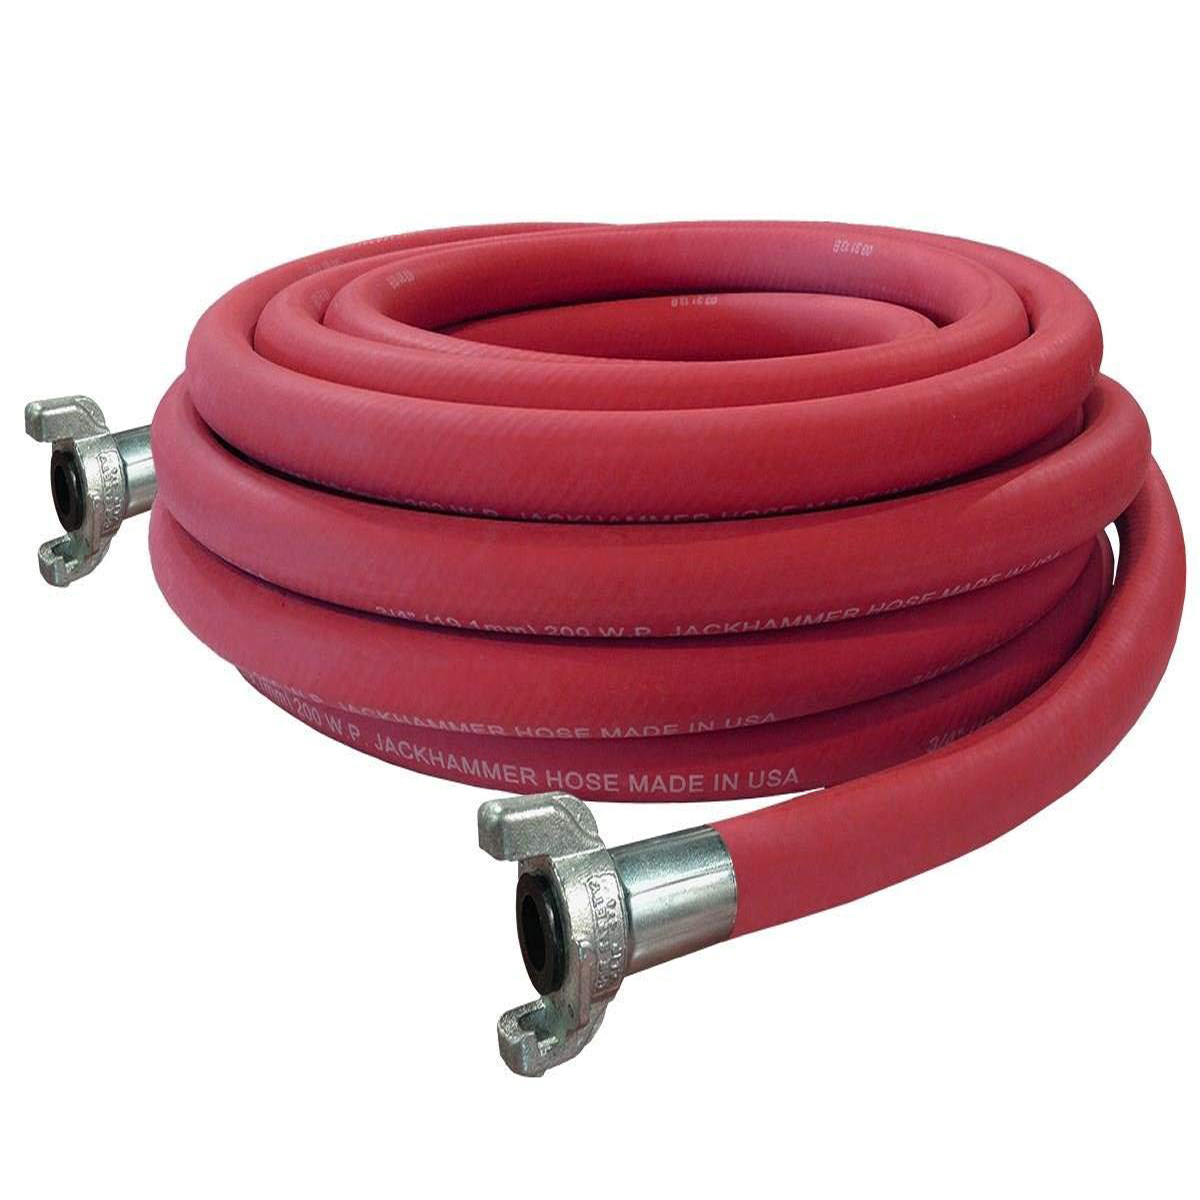 https://www.blastone.com/wp-content/uploads/P-AHRUSF_Fitted-Chicago-Air-Supply-Hose-Main-WEB.jpg